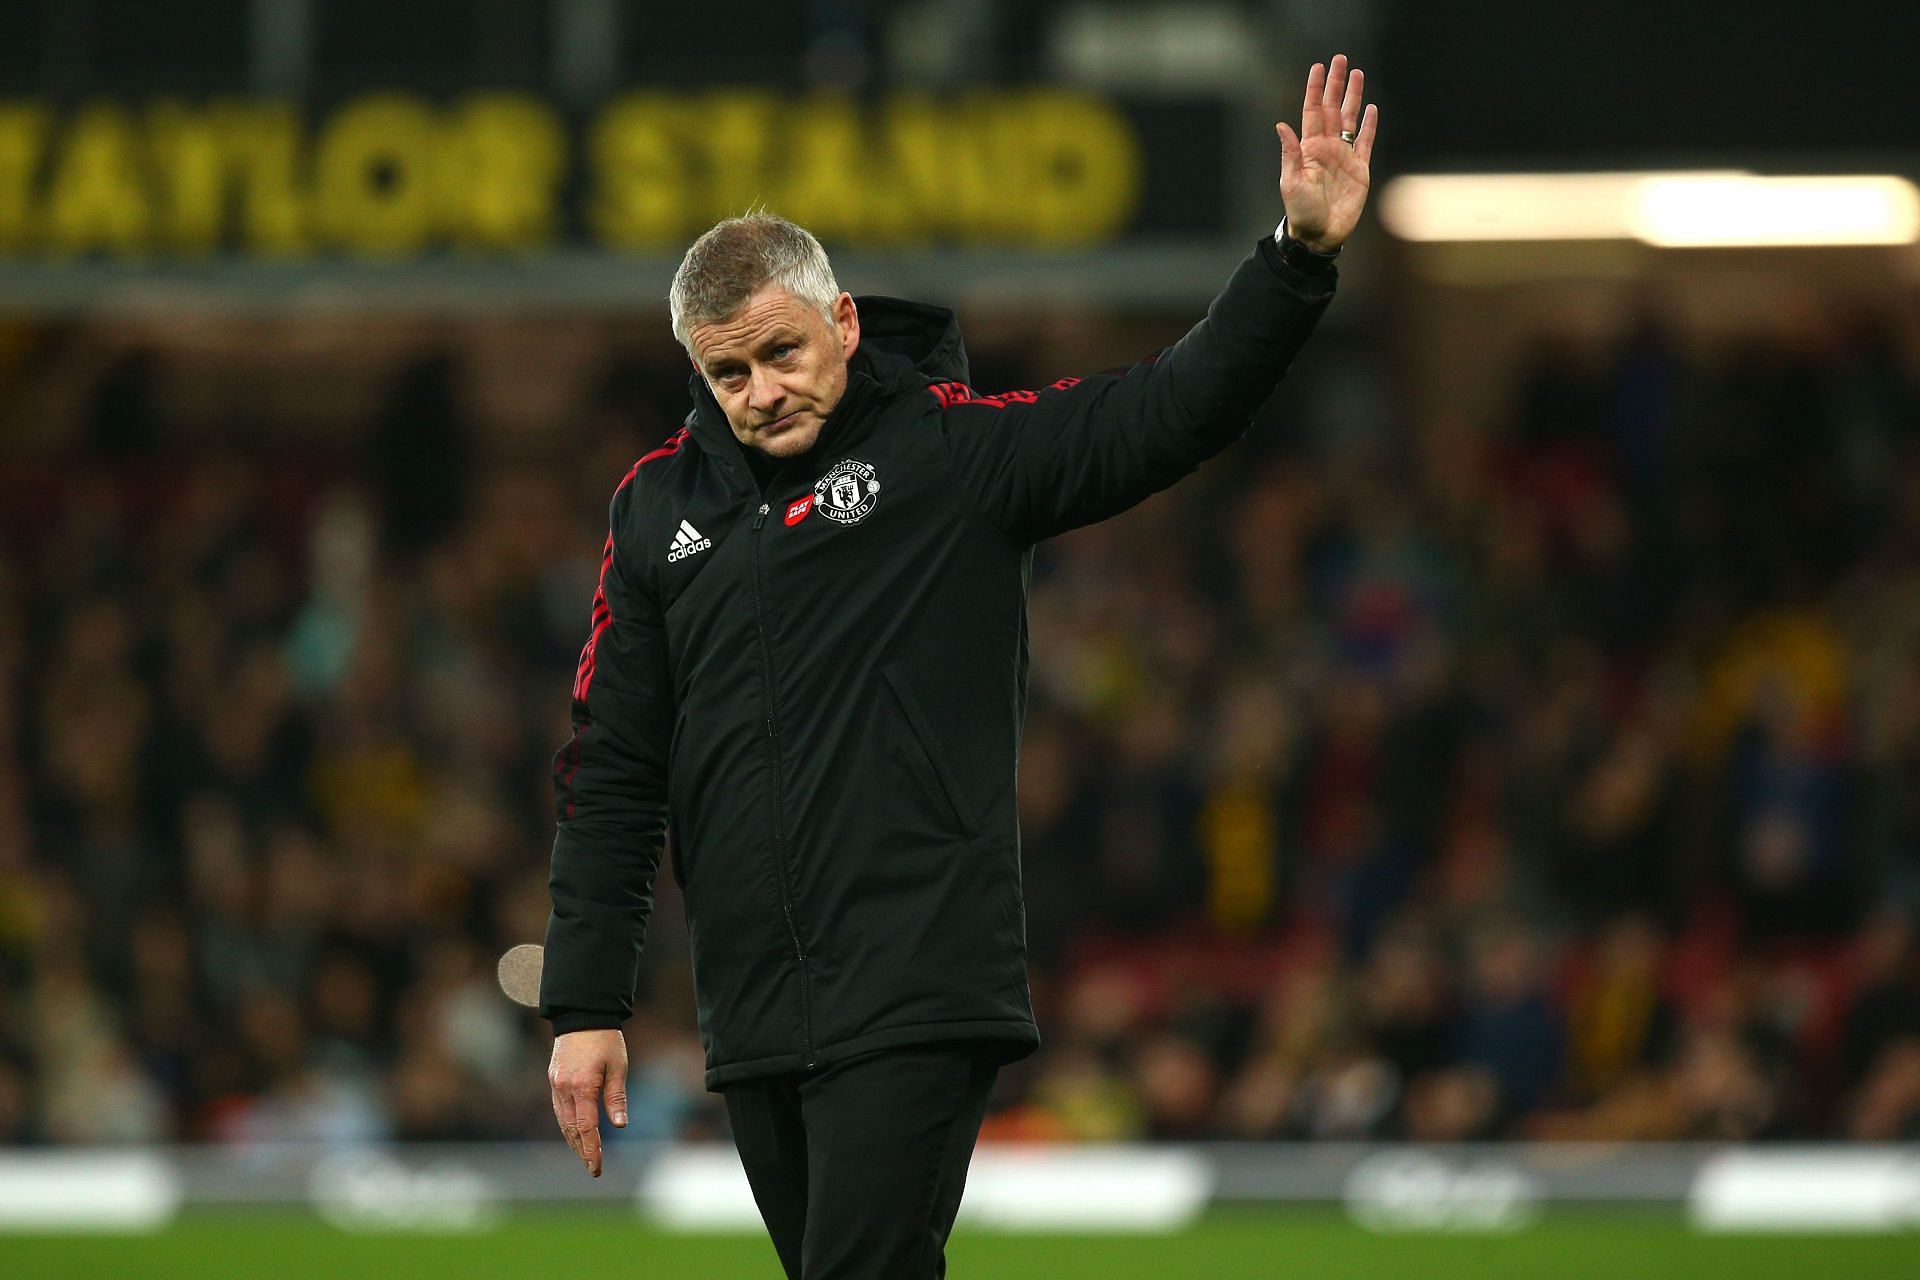 Ole Gunnar Solskjaer has been sacked by Manchester United